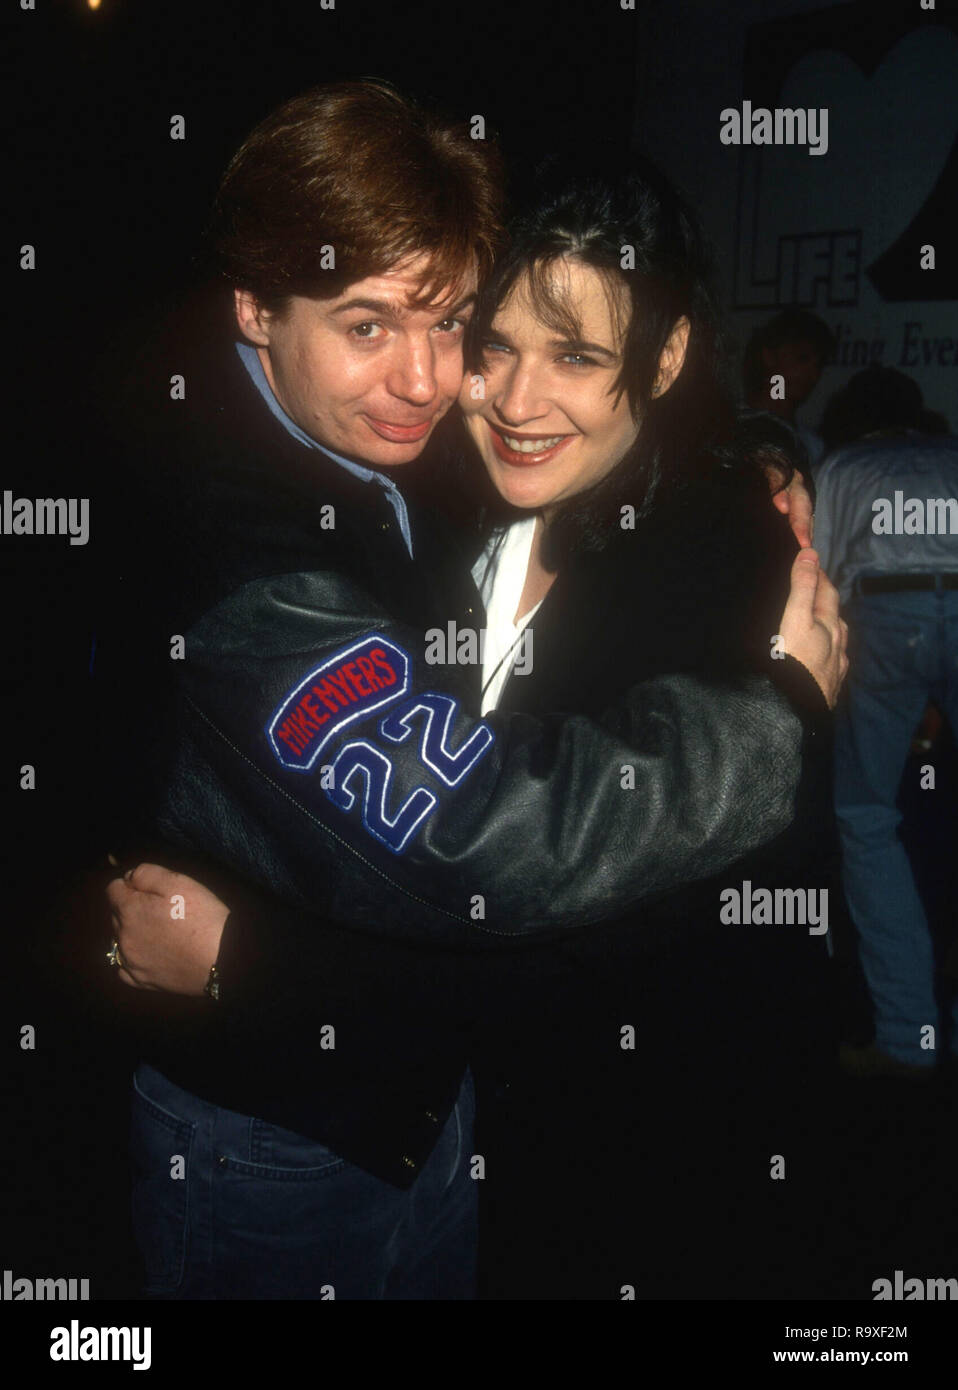 HOLLYWOOD, CA - JUNE 26: Actor/comedian Mike Myers and wife Robin Ruzan attend the Fifth Annual Project Robin Hood Food Drive to Benefit Love Is Feeding Everyone (LIFE) on June 26, 1993 at Paramount Pictures Studios in Hollywood, California. Photo by Barry King/Alamy Stock Photo Stock Photo